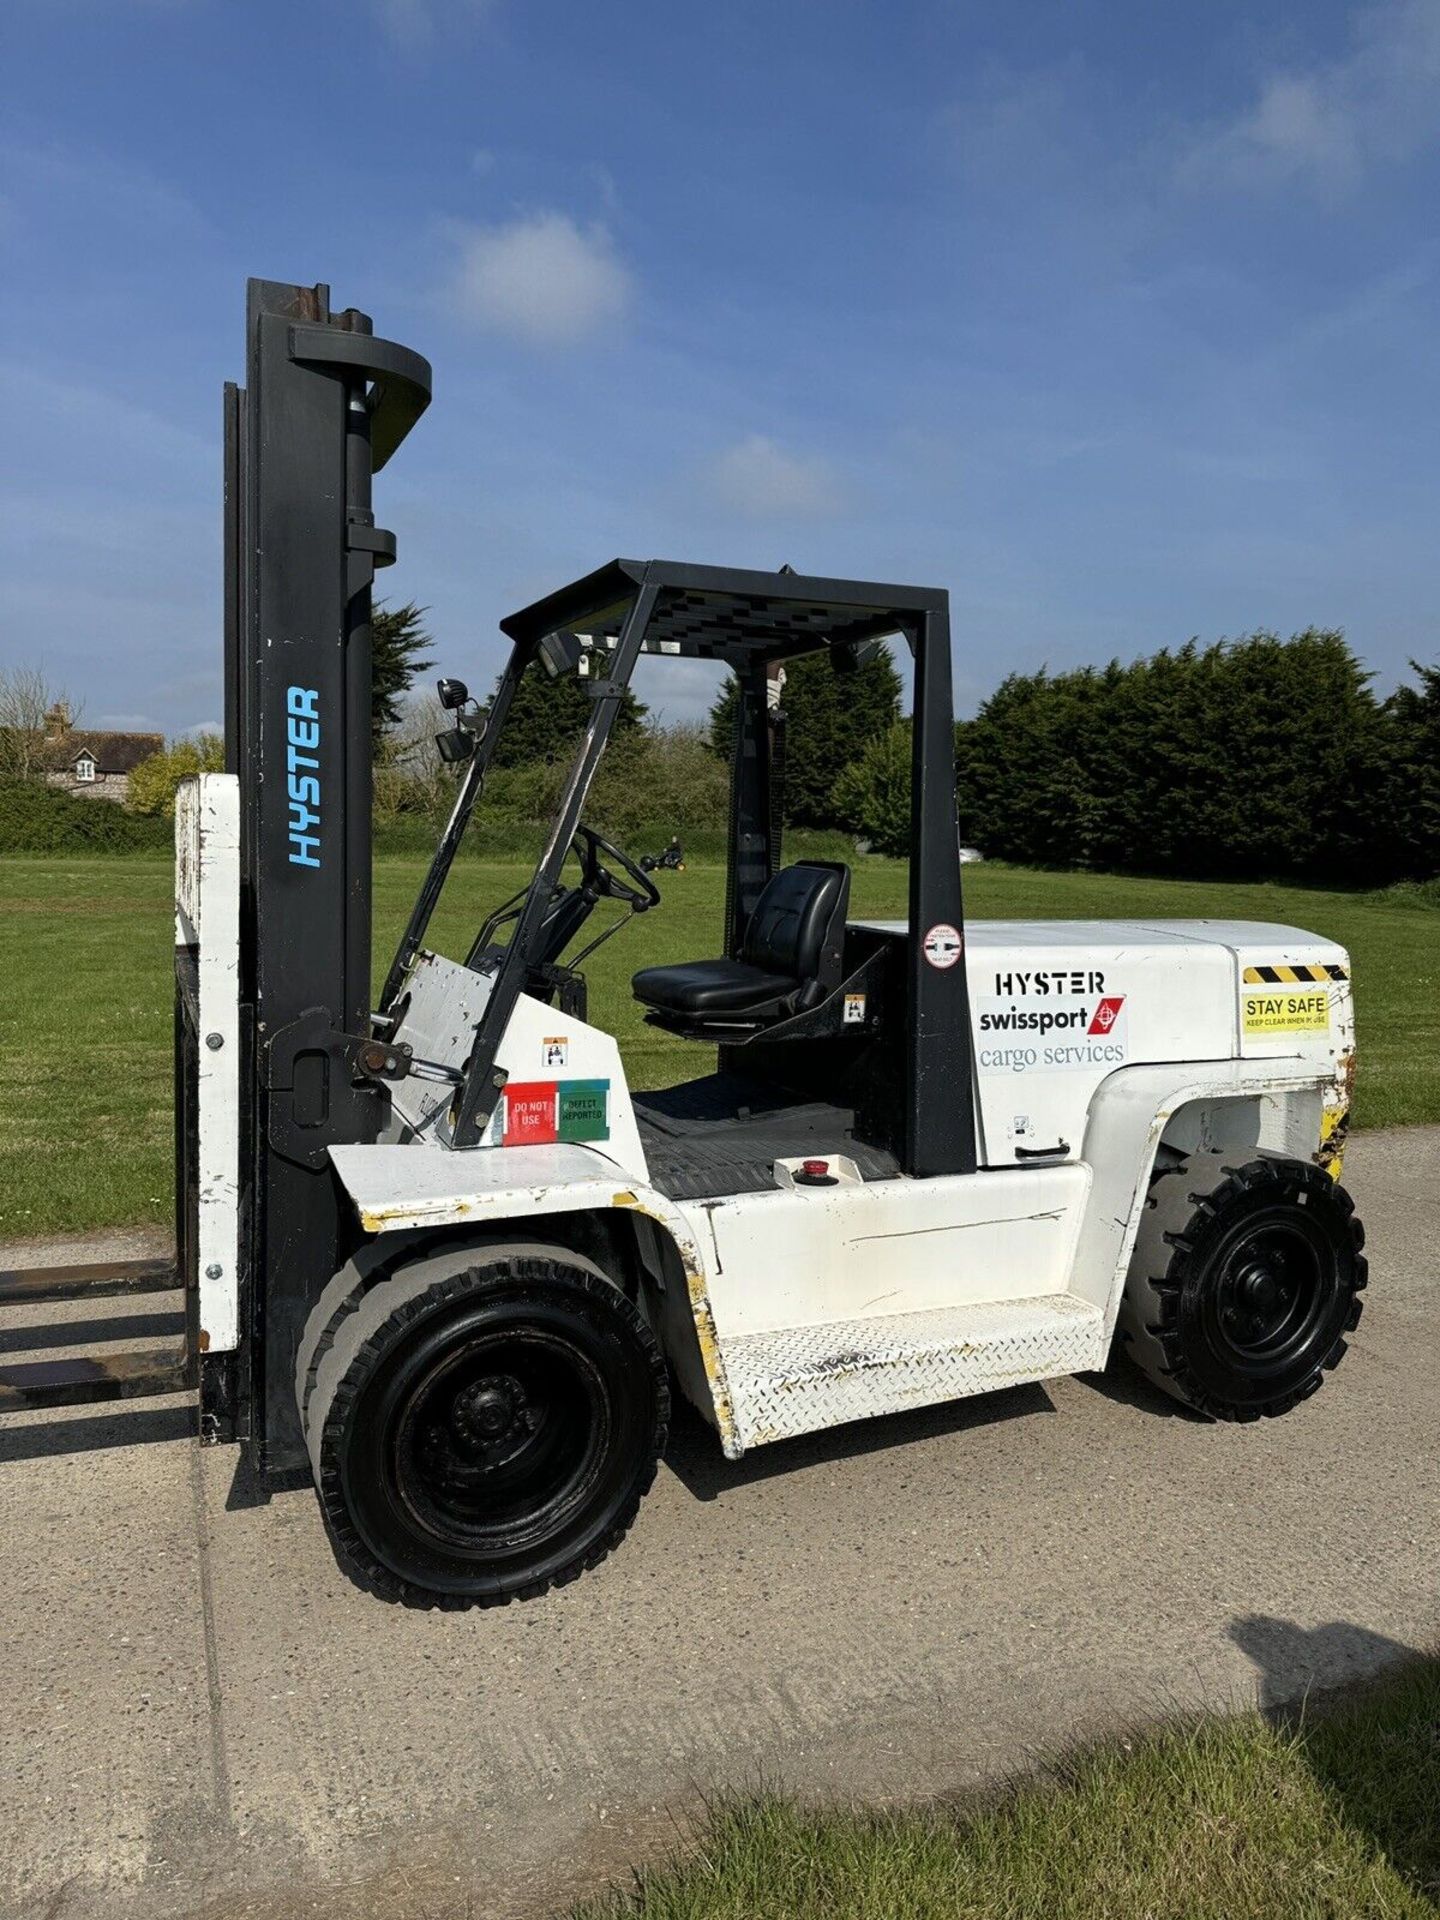 1996, HYSTER - 7 Tonne Diesel Forklift Truck (Direct from Airport) 3500 hours - Image 6 of 6